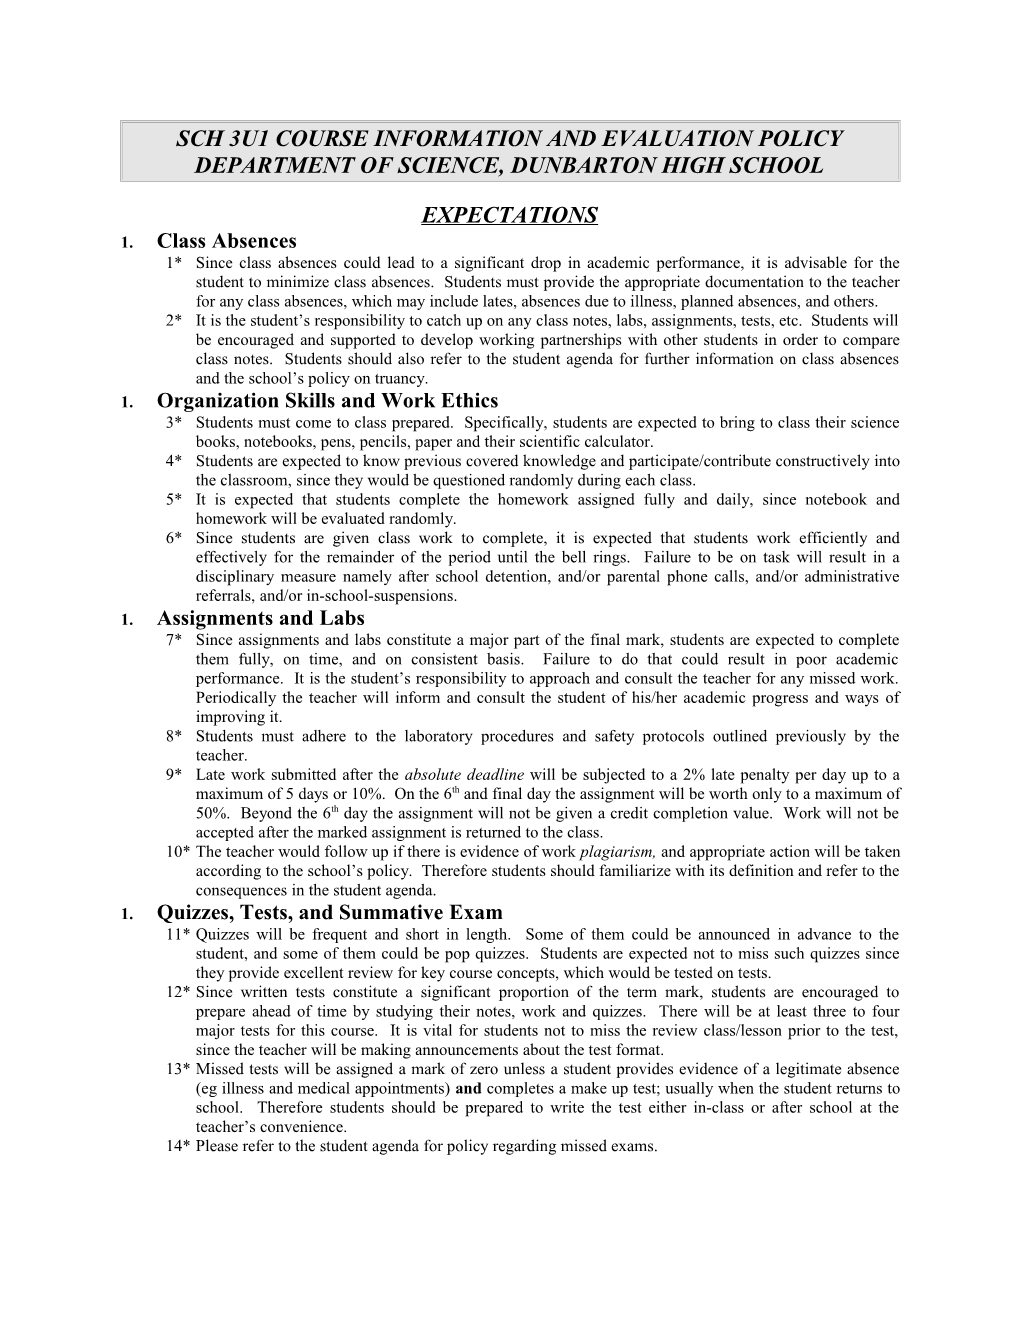 Snc 1P1 Course Information and Evaluation Policy